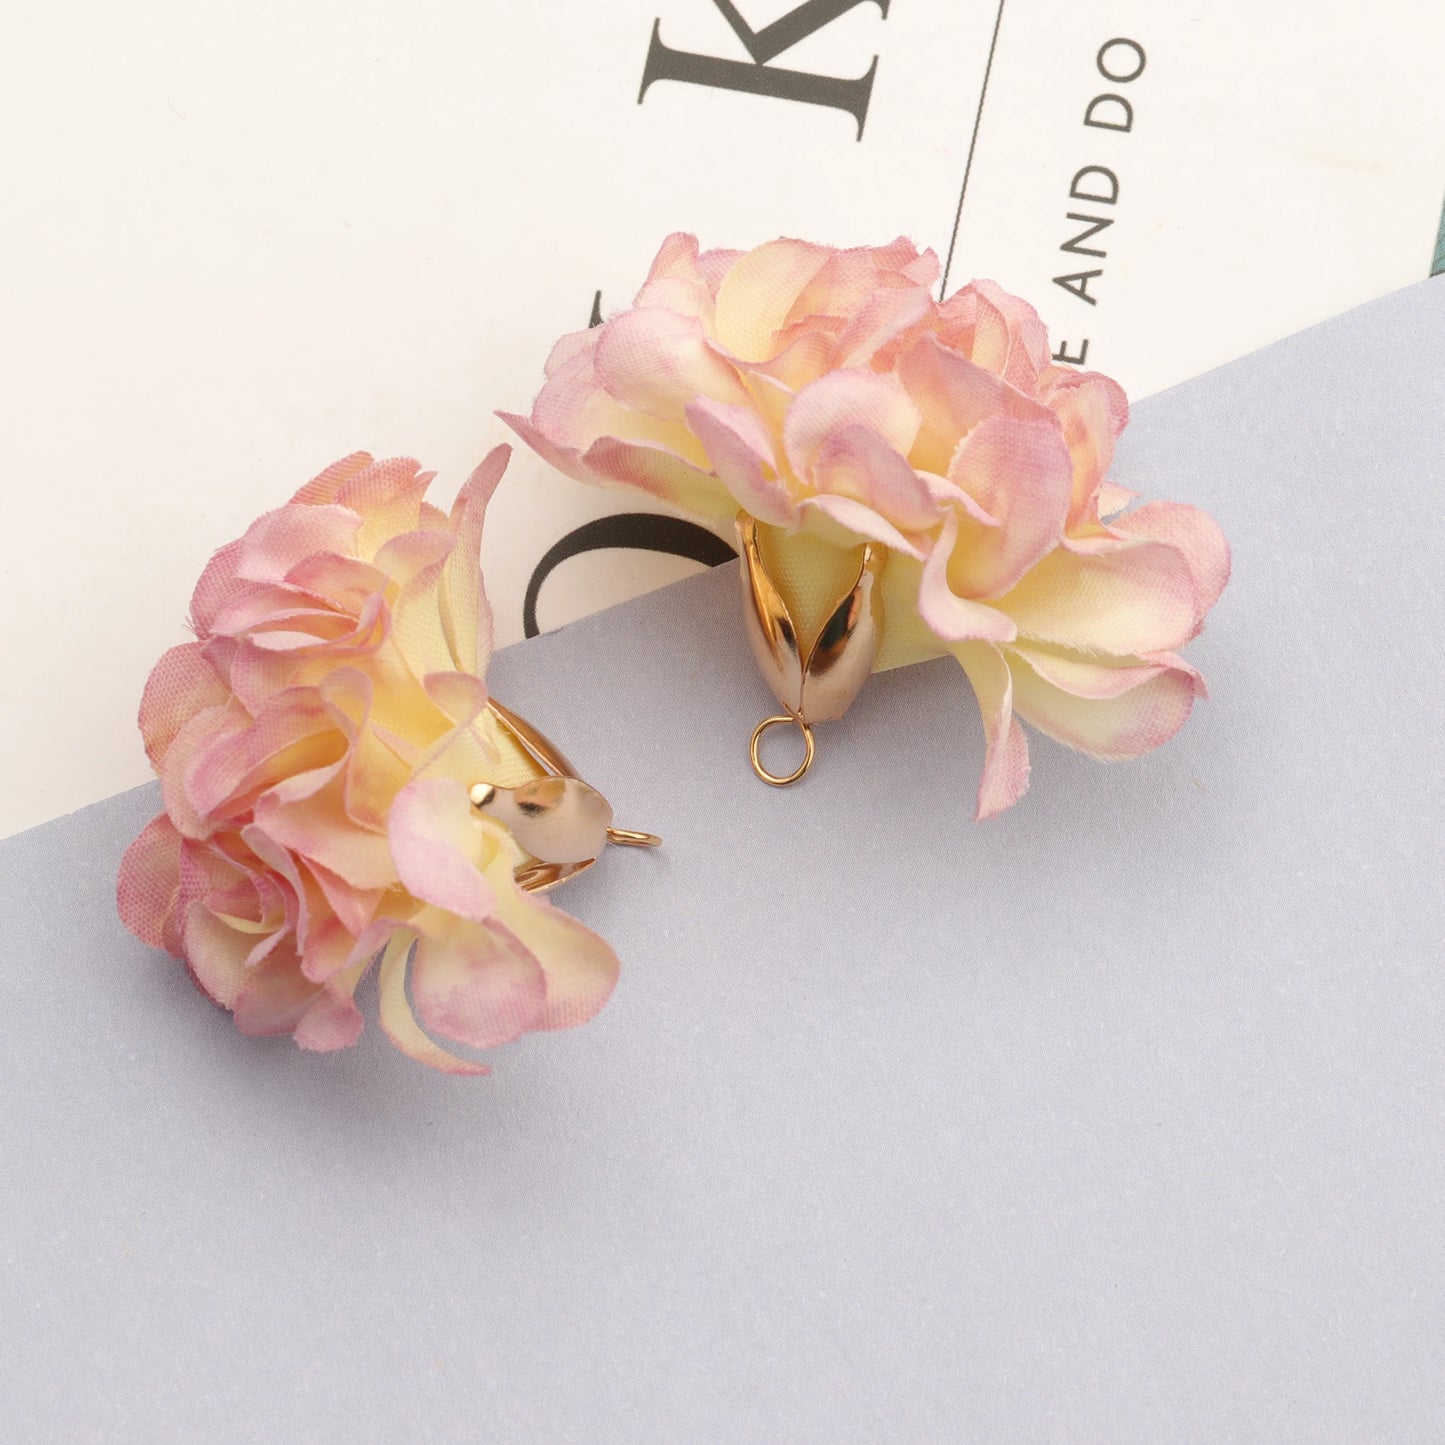 GUFEATHER F145,jewelry accessories,diy flower pendants,flower shape,charms,hand made,diy earring,jewelry making,10pcs/lot